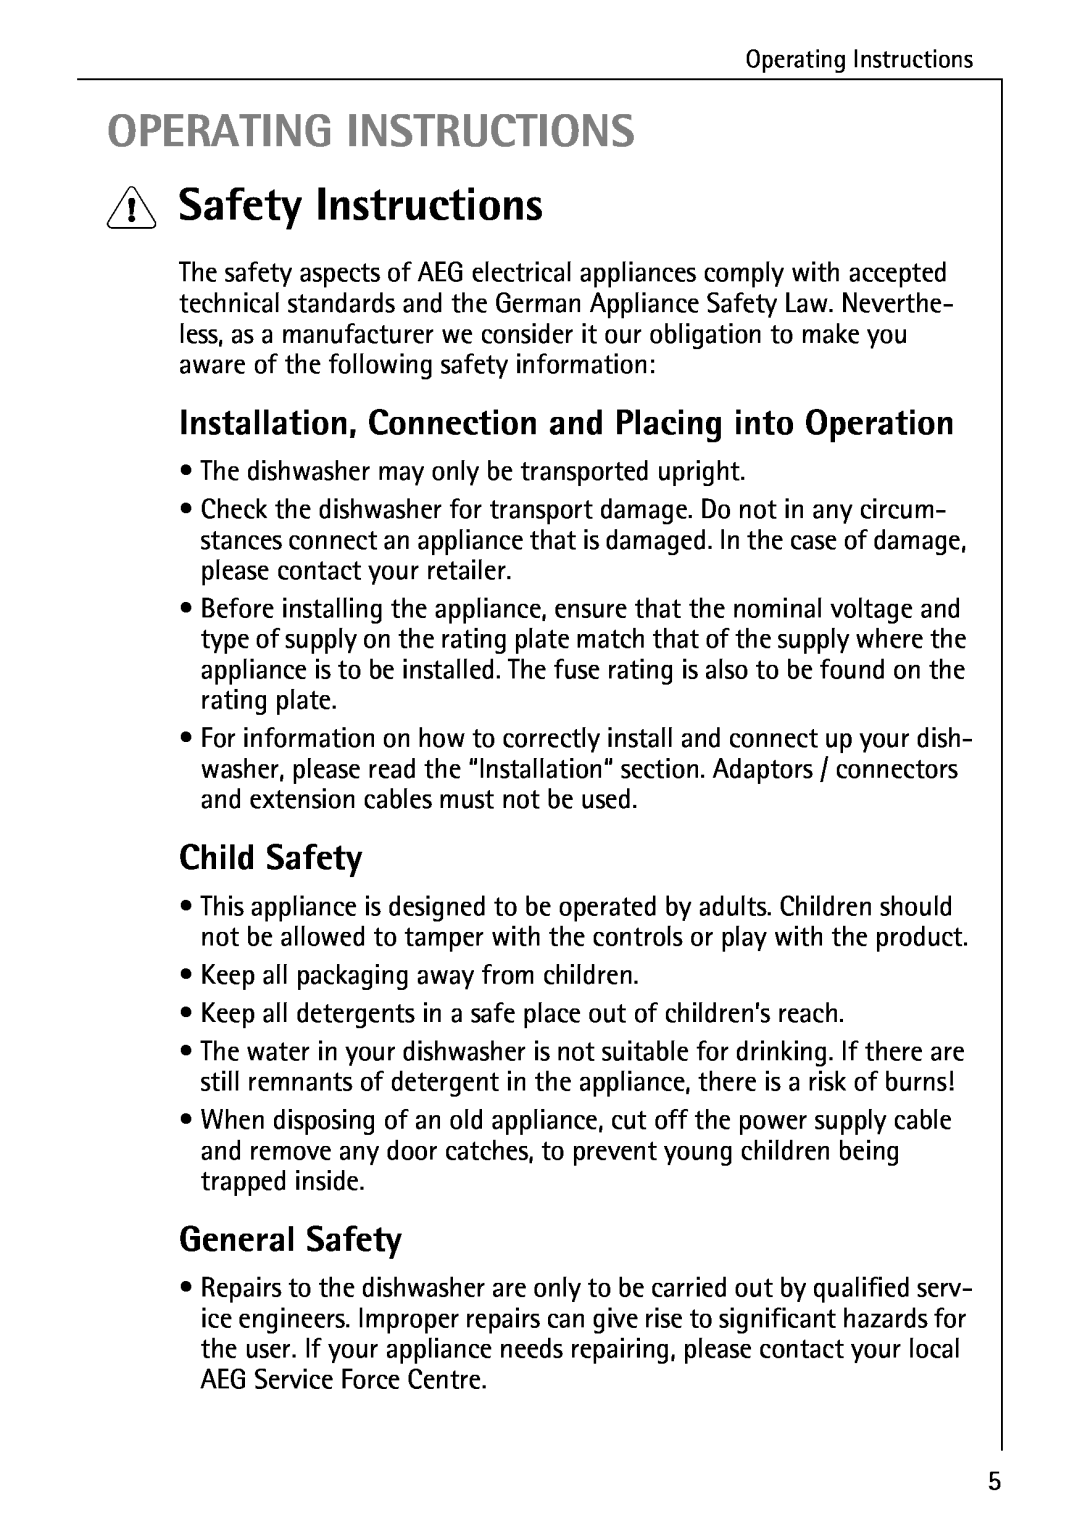 Electrolux FAVORIT 40660 i manual Operating Instructions, Safety Instructions, Child Safety, General Safety 